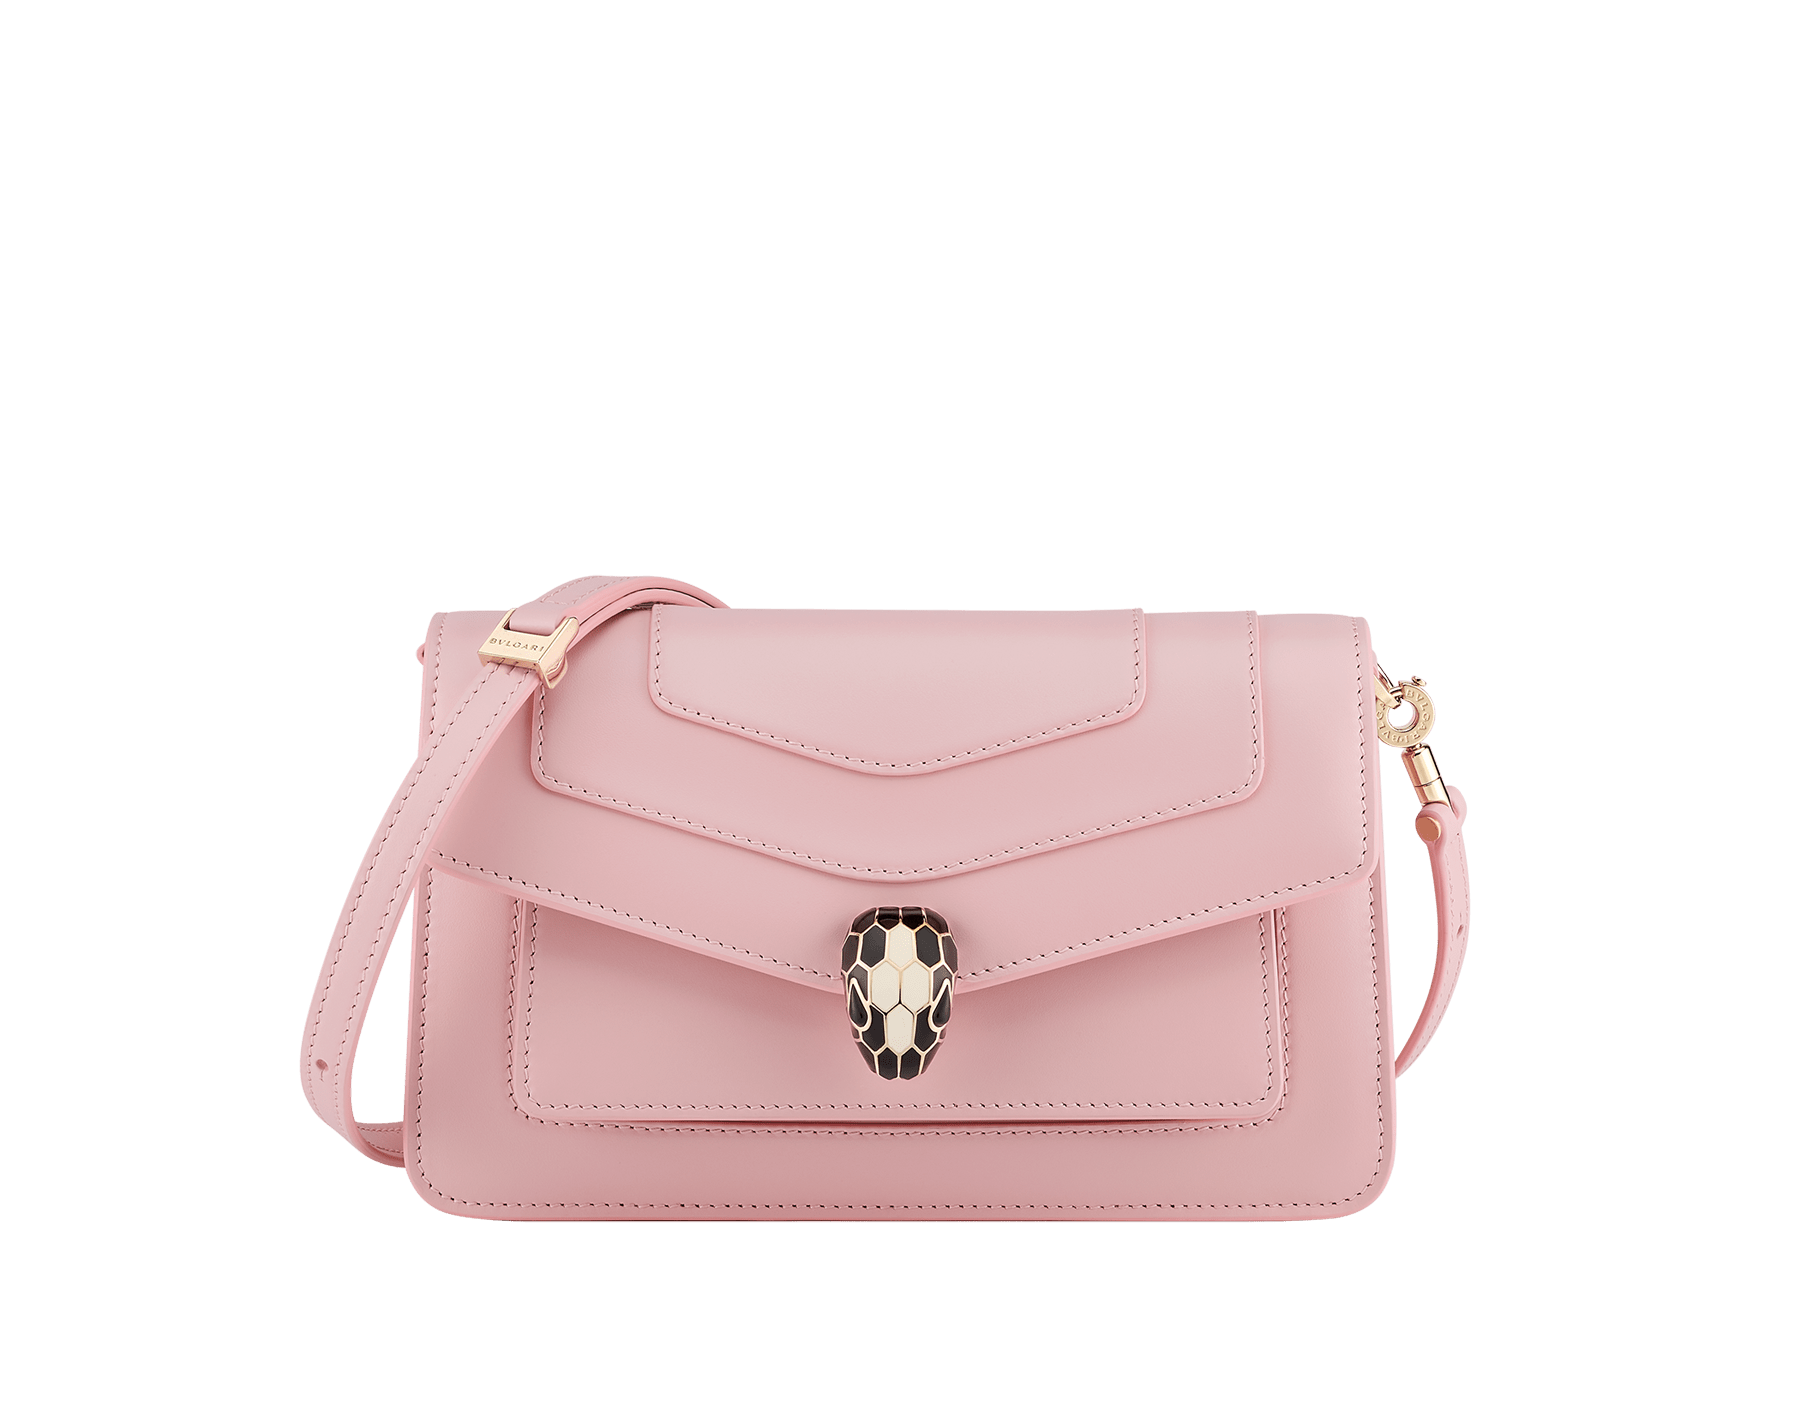 Serpenti Forever East-West small shoulder bag in primrose quartz pink calf leather, with heather amethyst pink grosgrain lining. Captivating magnetic snakehead closure in light gold-plated brass embellished with black and white agate enamel scales and black onyx eyes. 1237-Cla image 1